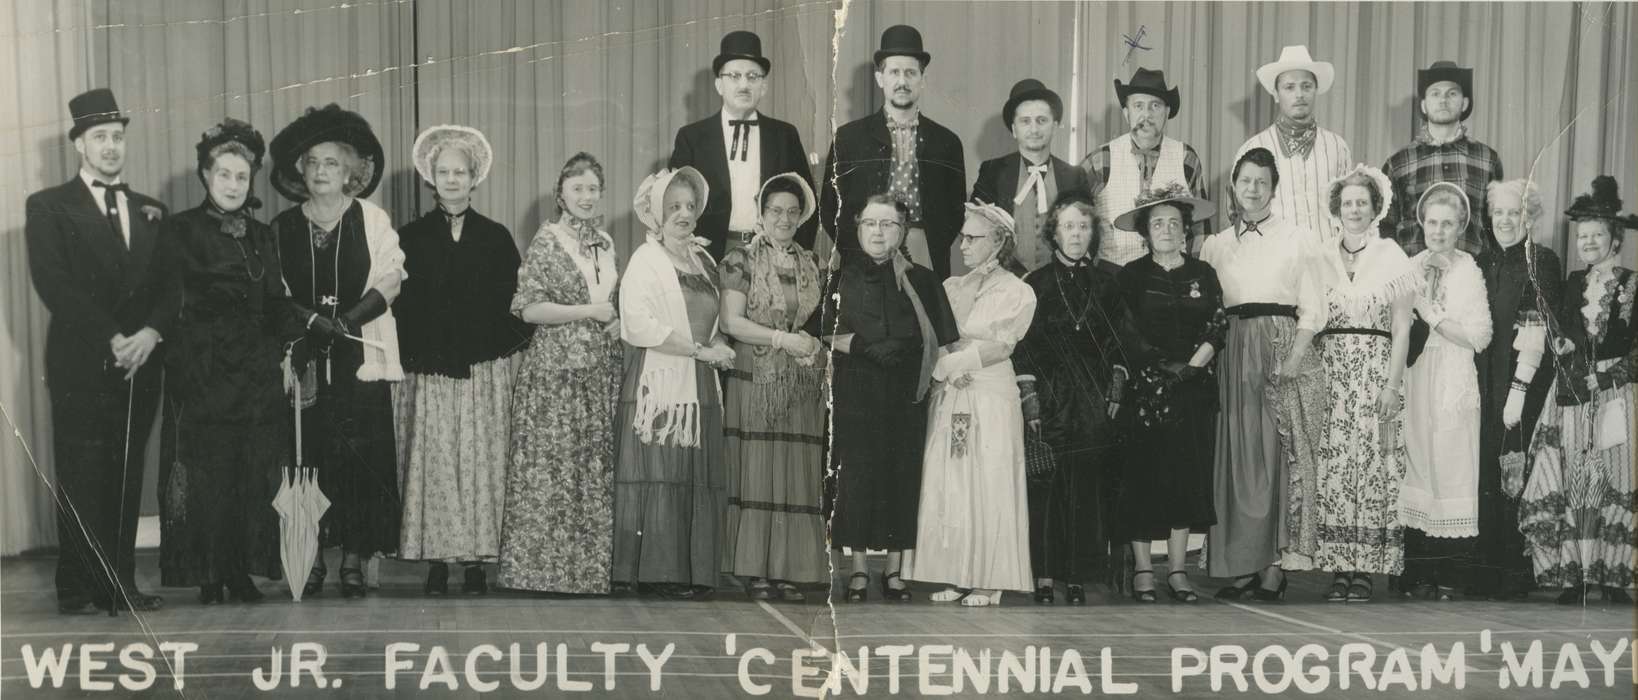 play, performance, history of Iowa, stage, Iowa, Iowa History, Rossiter, Lynn, Entertainment, Portraits - Group, umbrella, Sioux City, IA, Schools and Education, cowboy hat